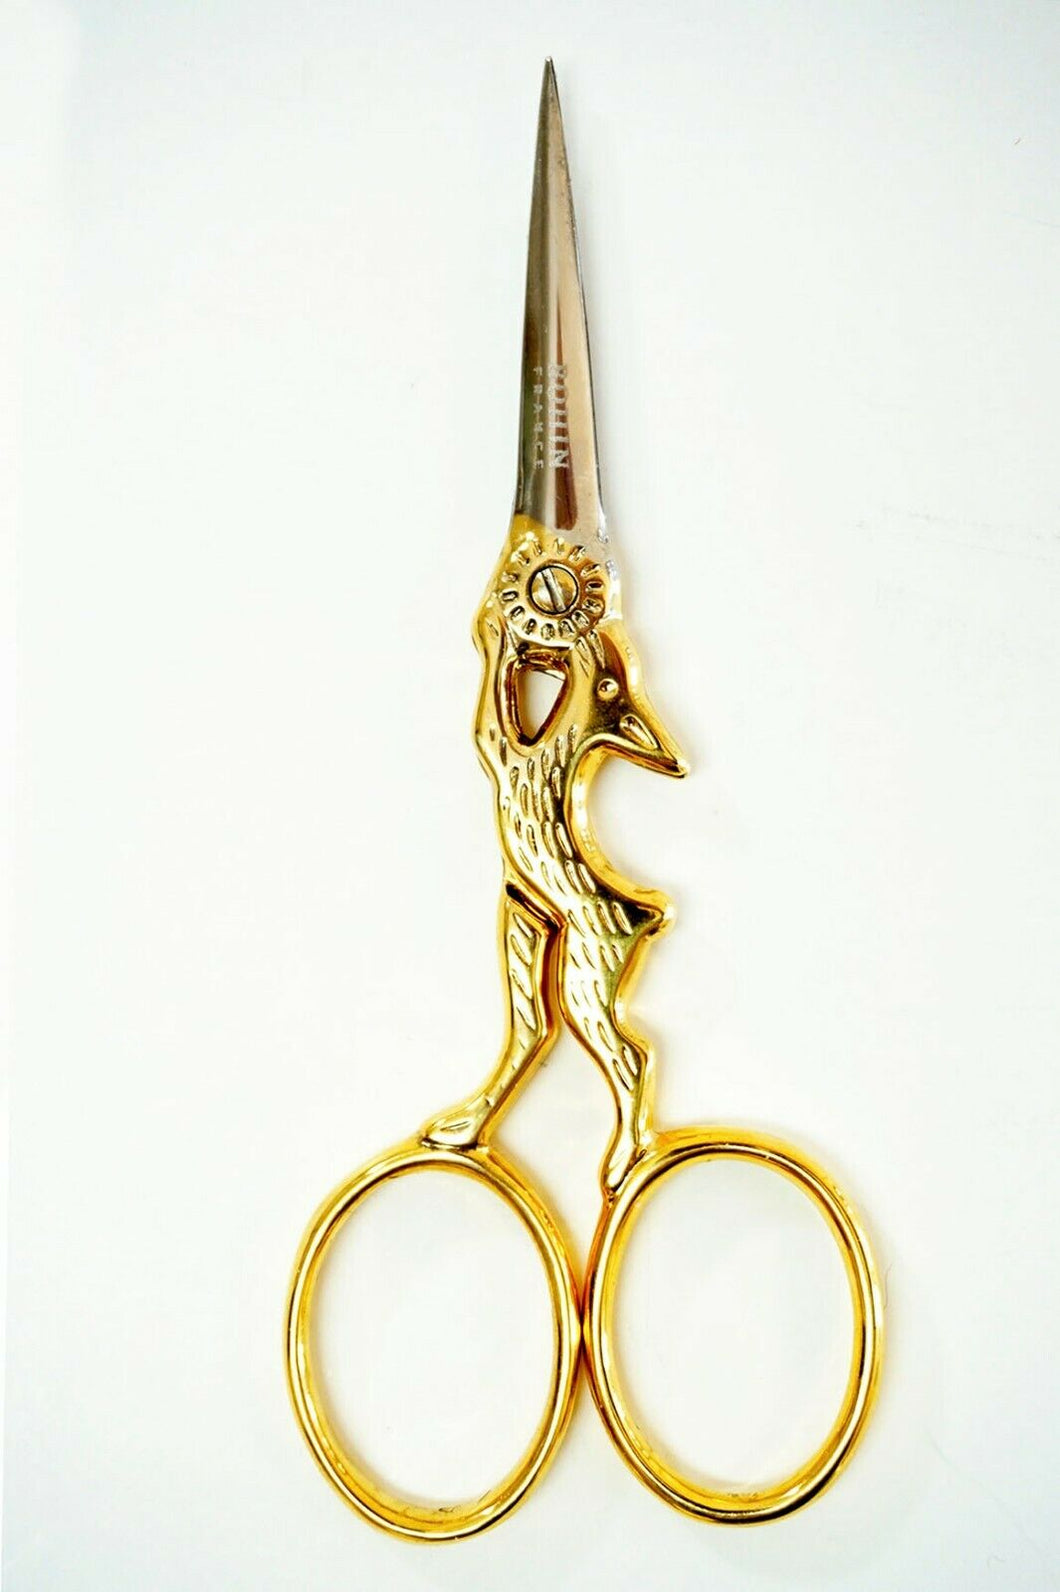 Rabbit Embroidery Scissor 4in by Tooltron